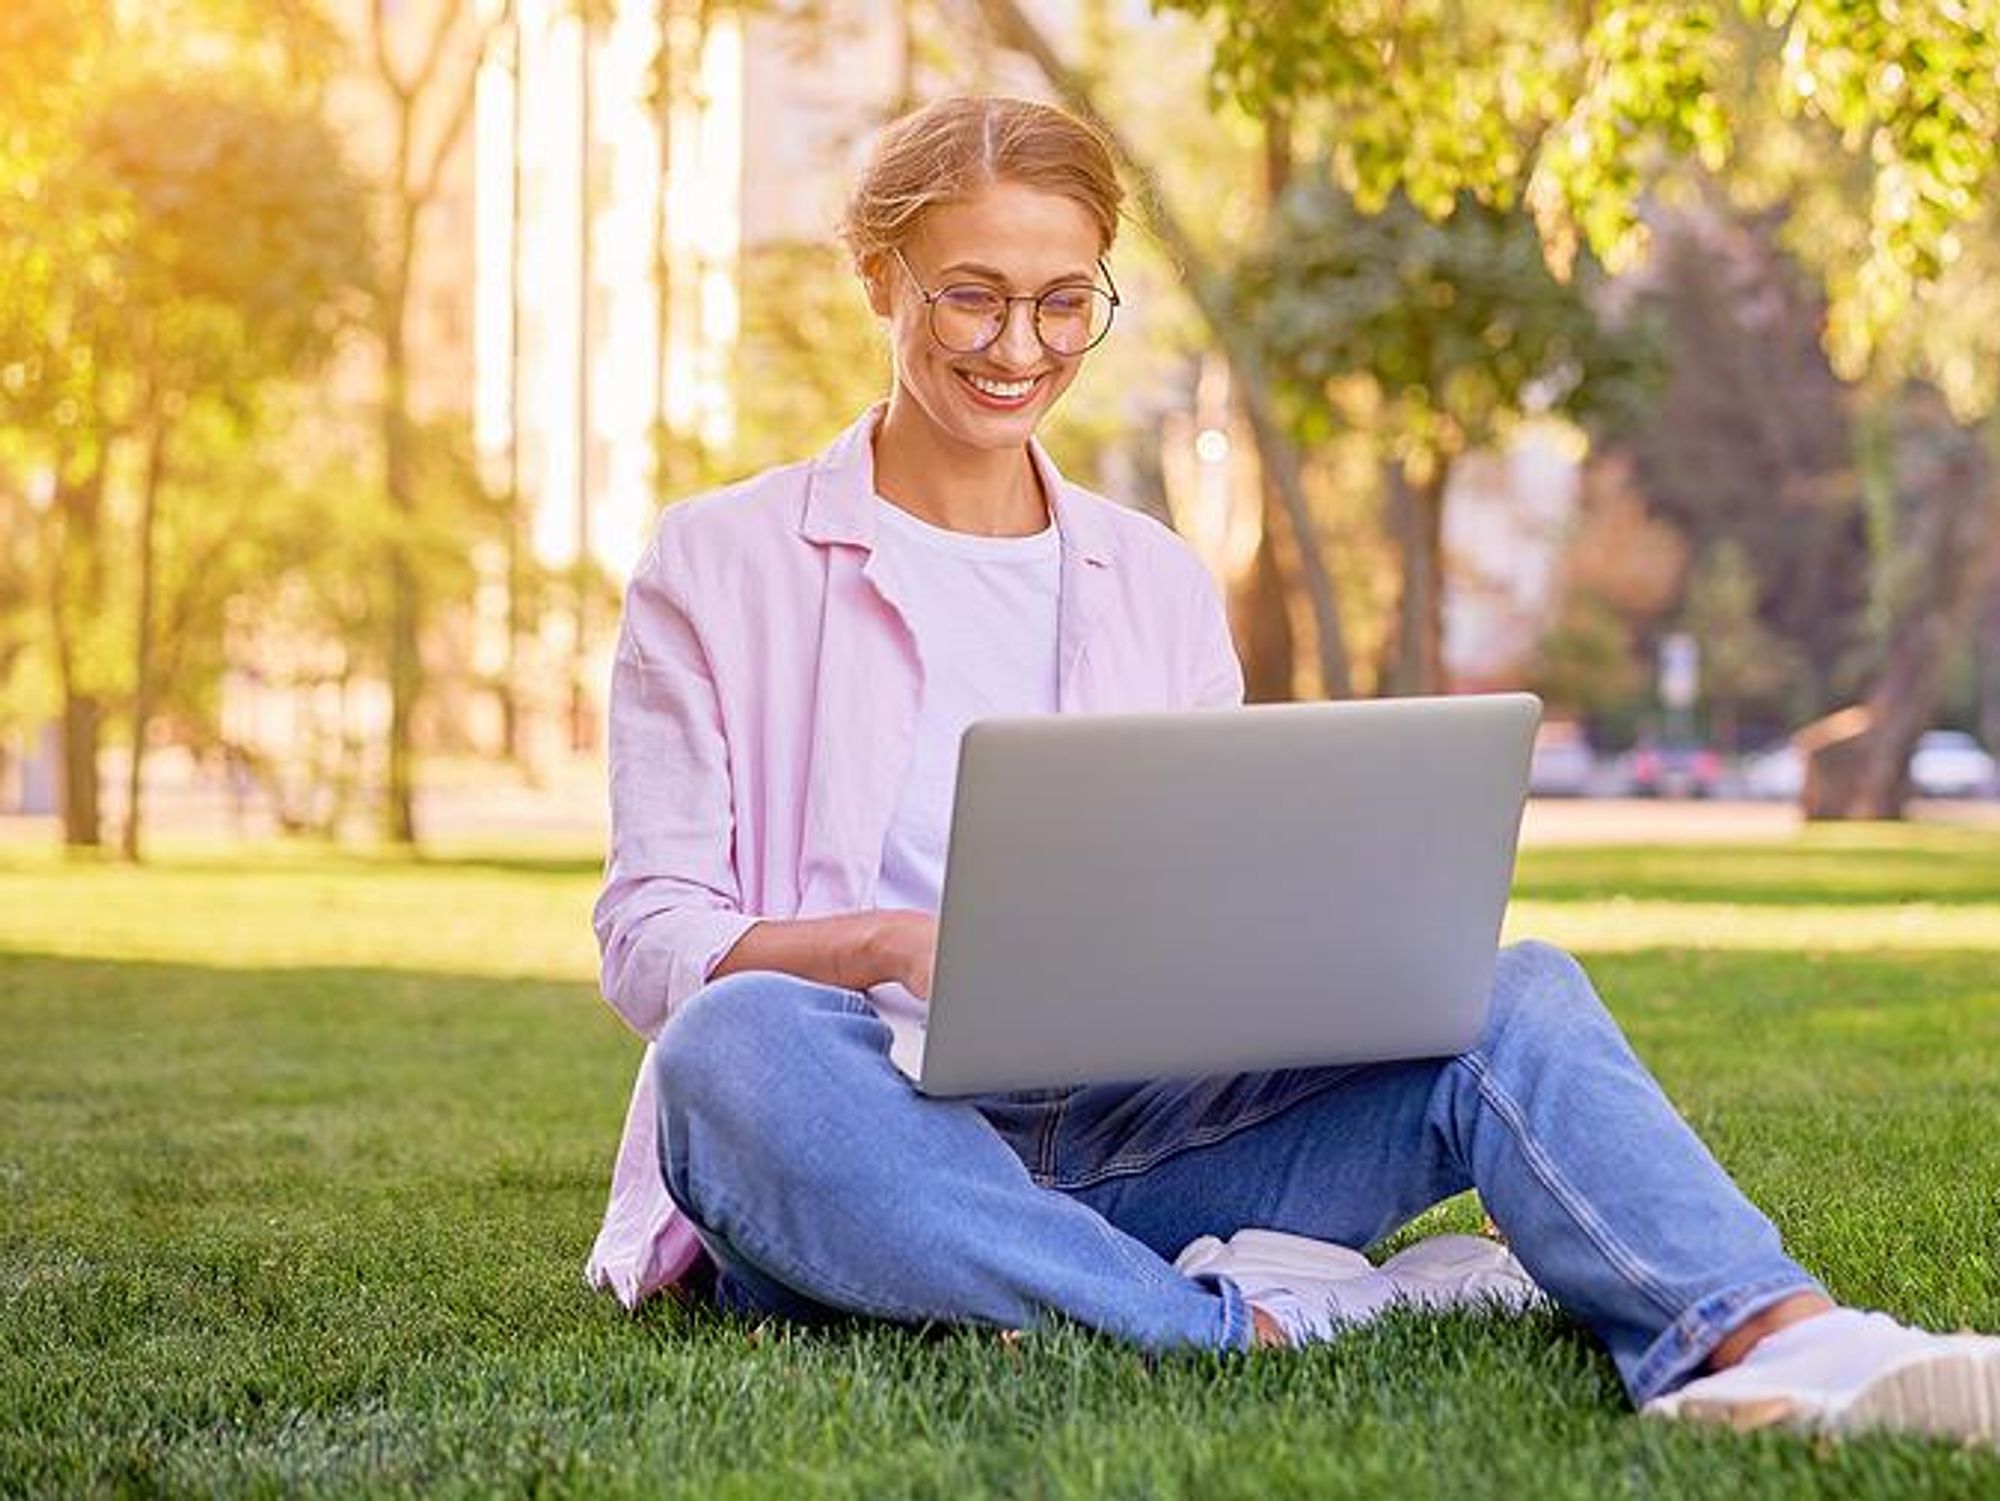 Woman sitting on grass types on her laptop